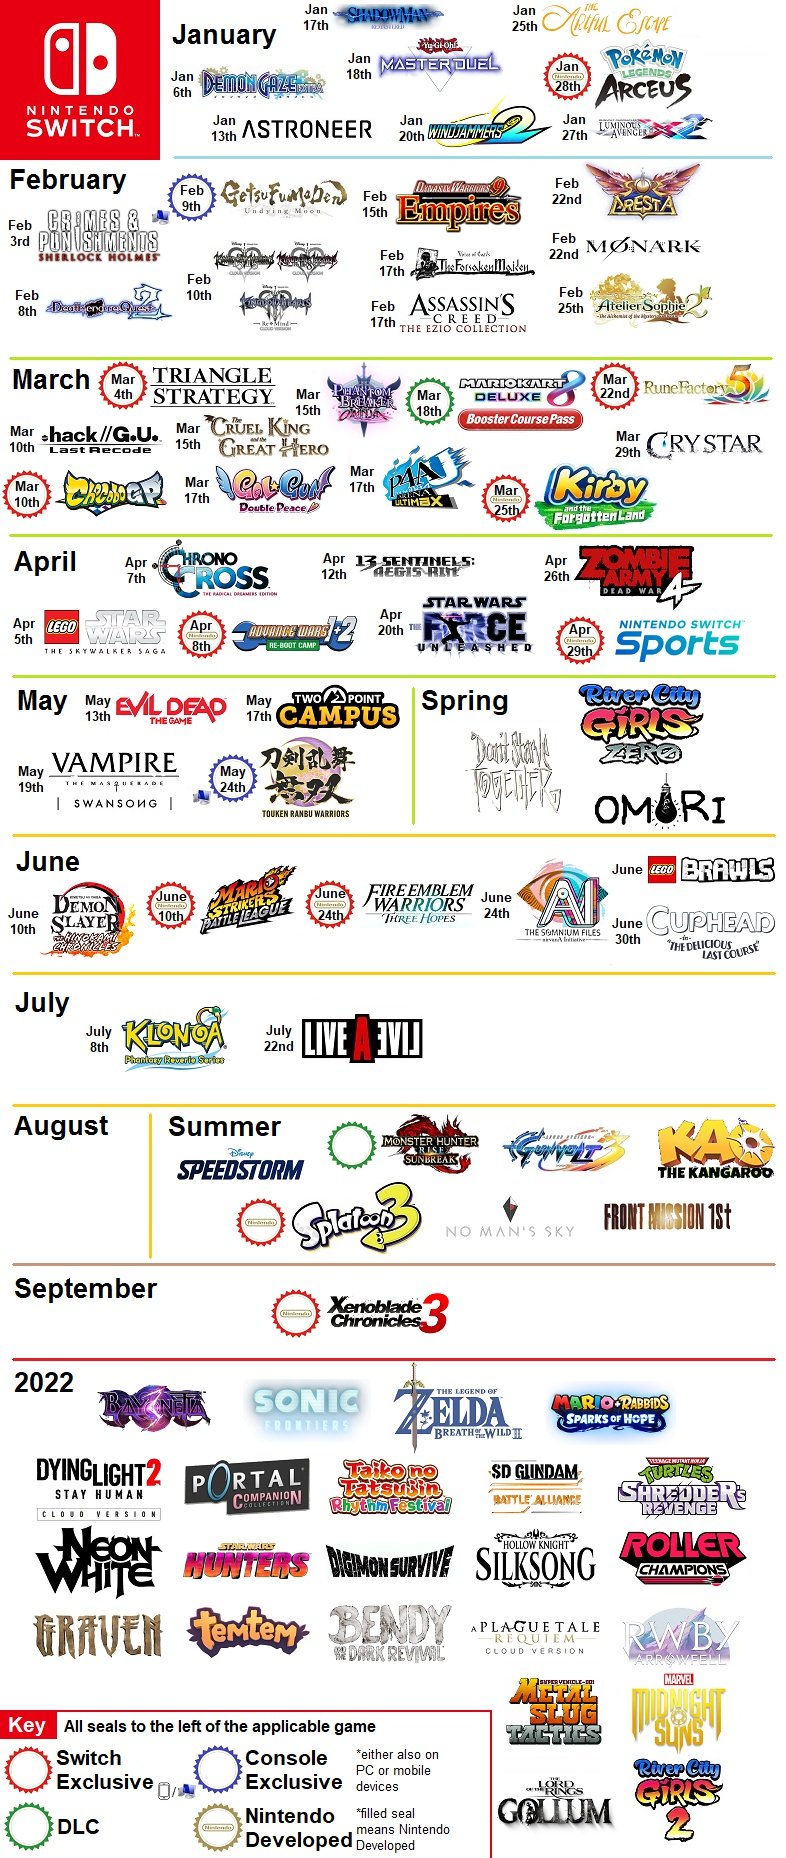 nintendo-switch-image-collects-the-release-dates-of-the-most.jpg